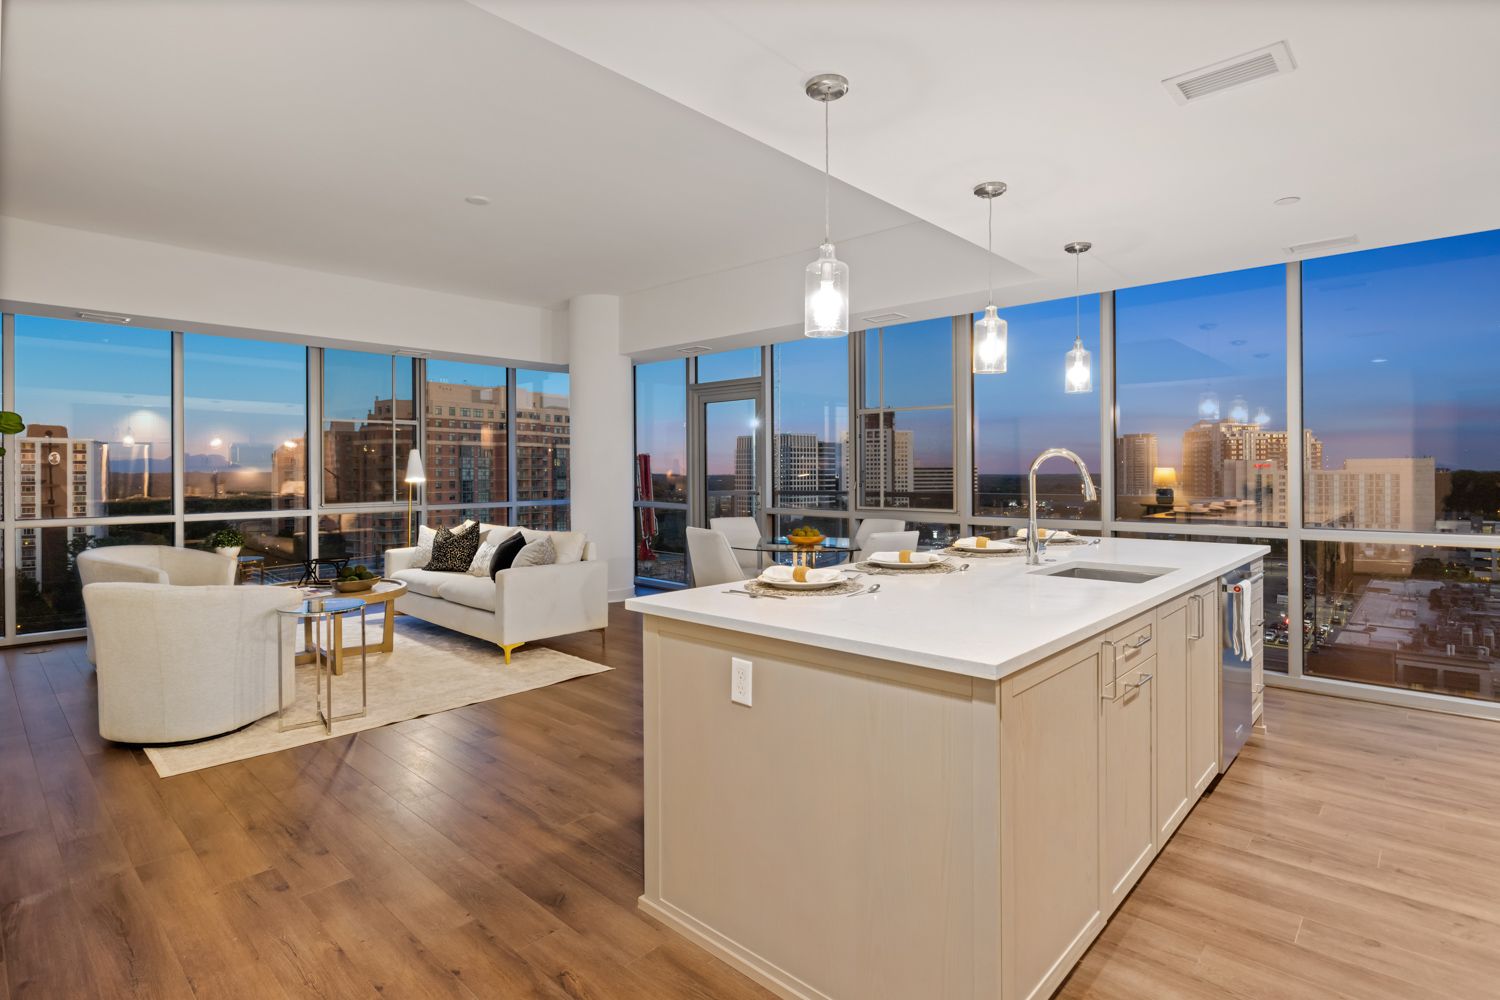 Apartment overlooking city - Twilight shoot by Craig Westerman